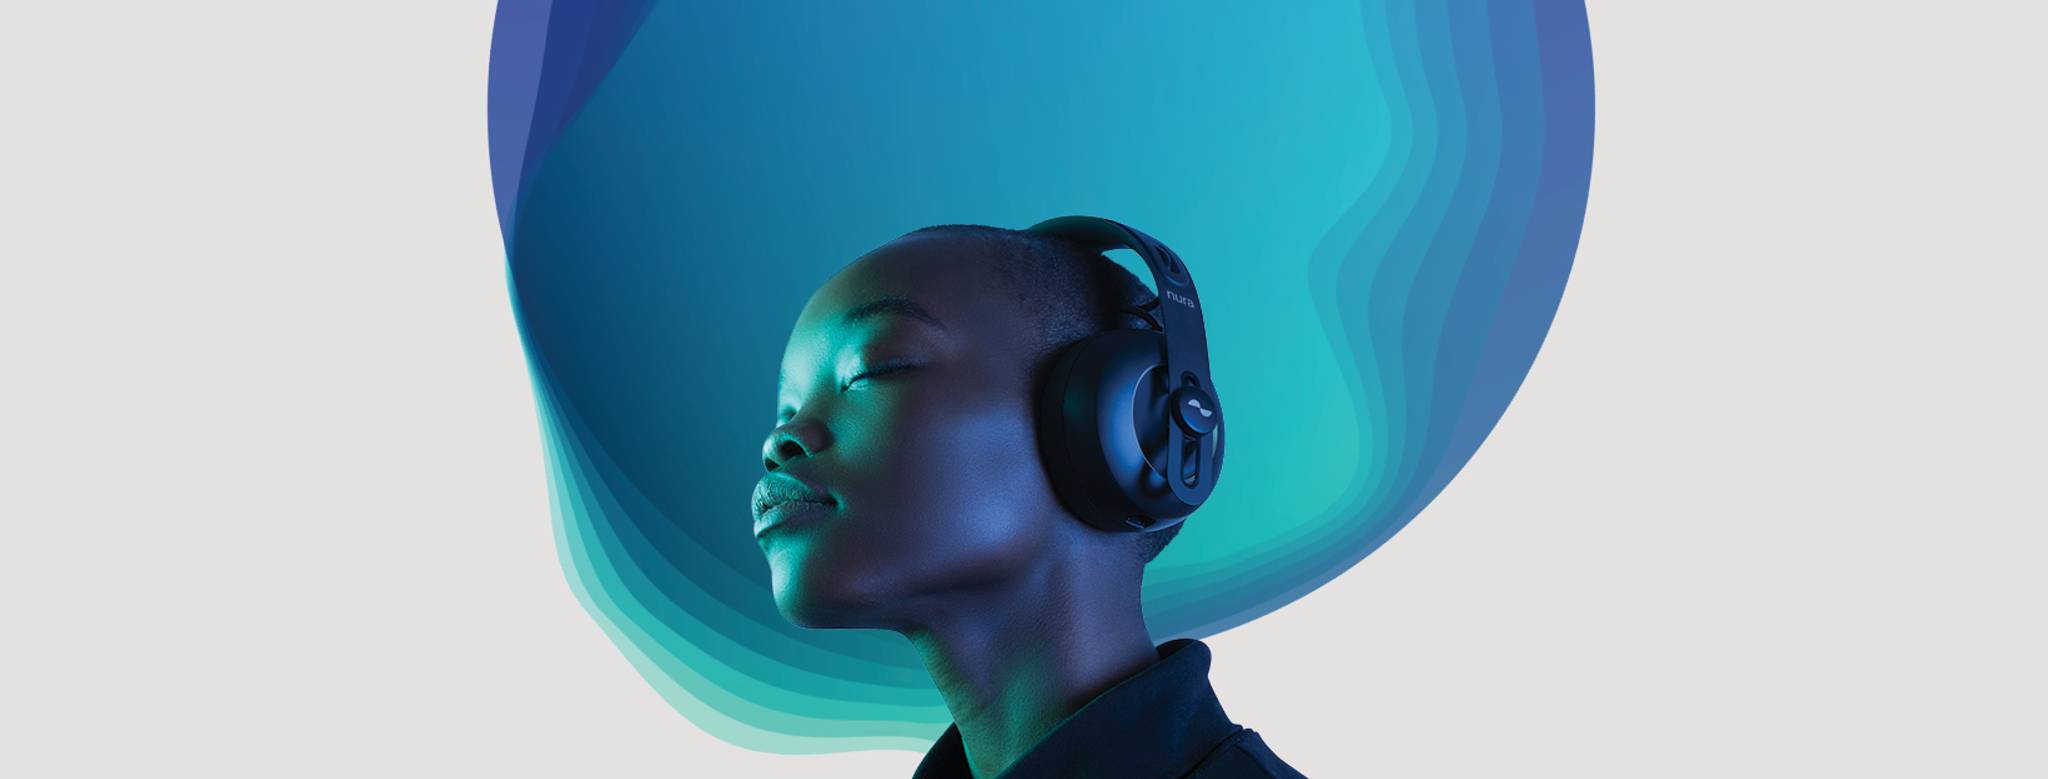 NuraNow: pay-as-you-play headphones for music fans